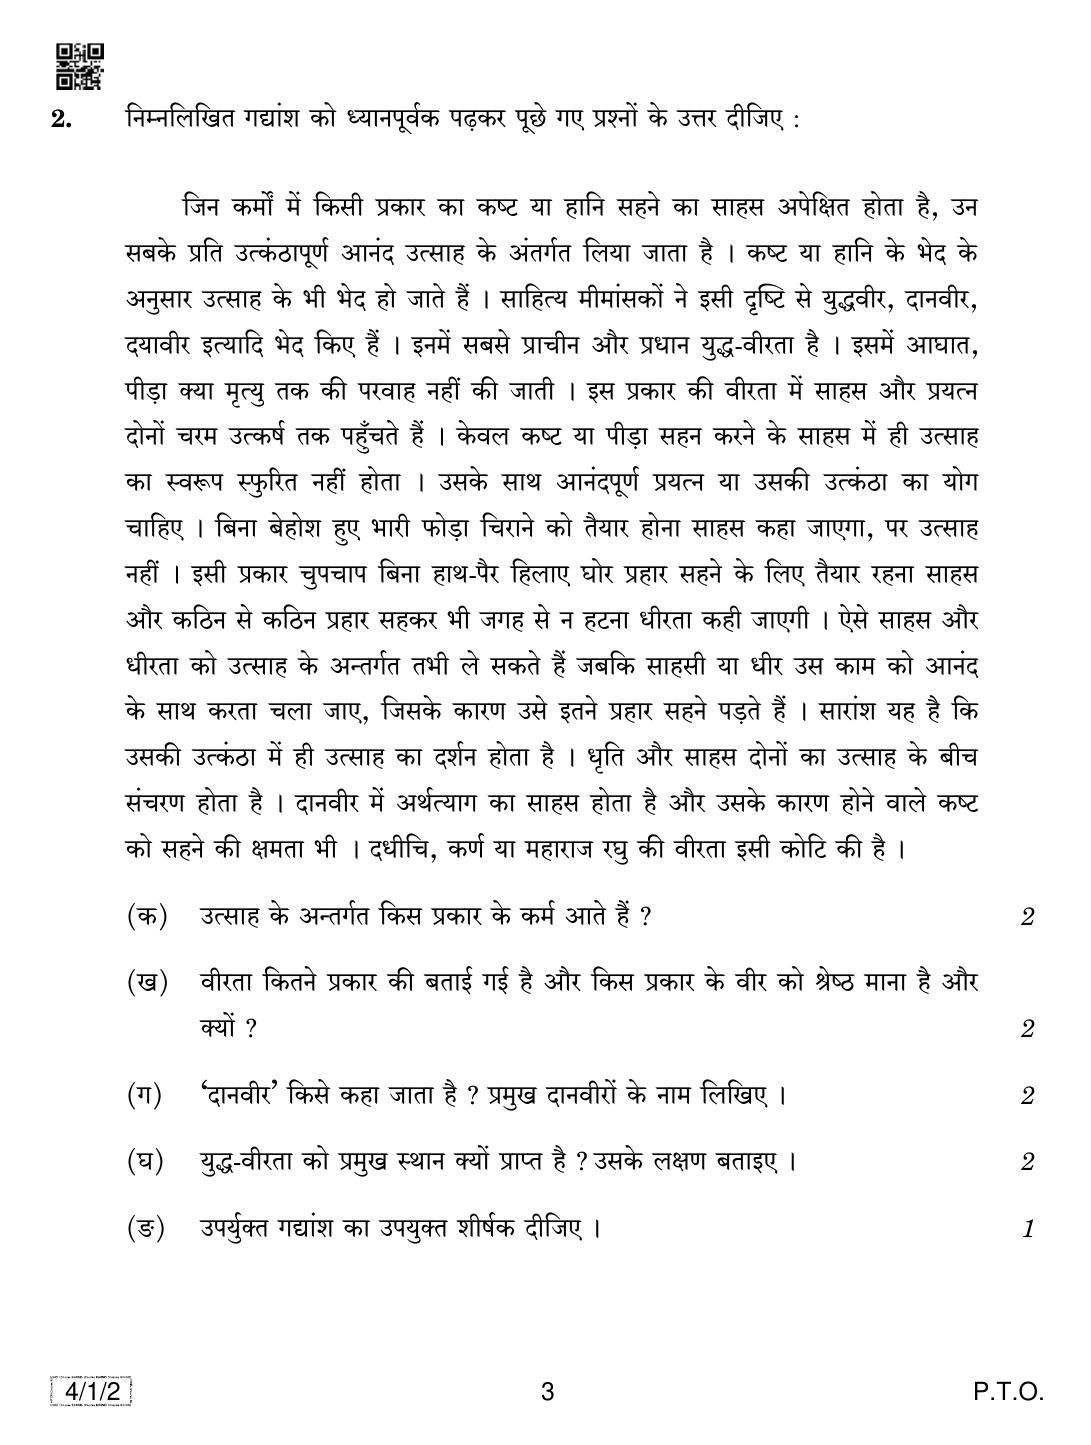 CBSE Class 10 4-1-2 HINDI B 2019 Compartment Question Paper - Page 3